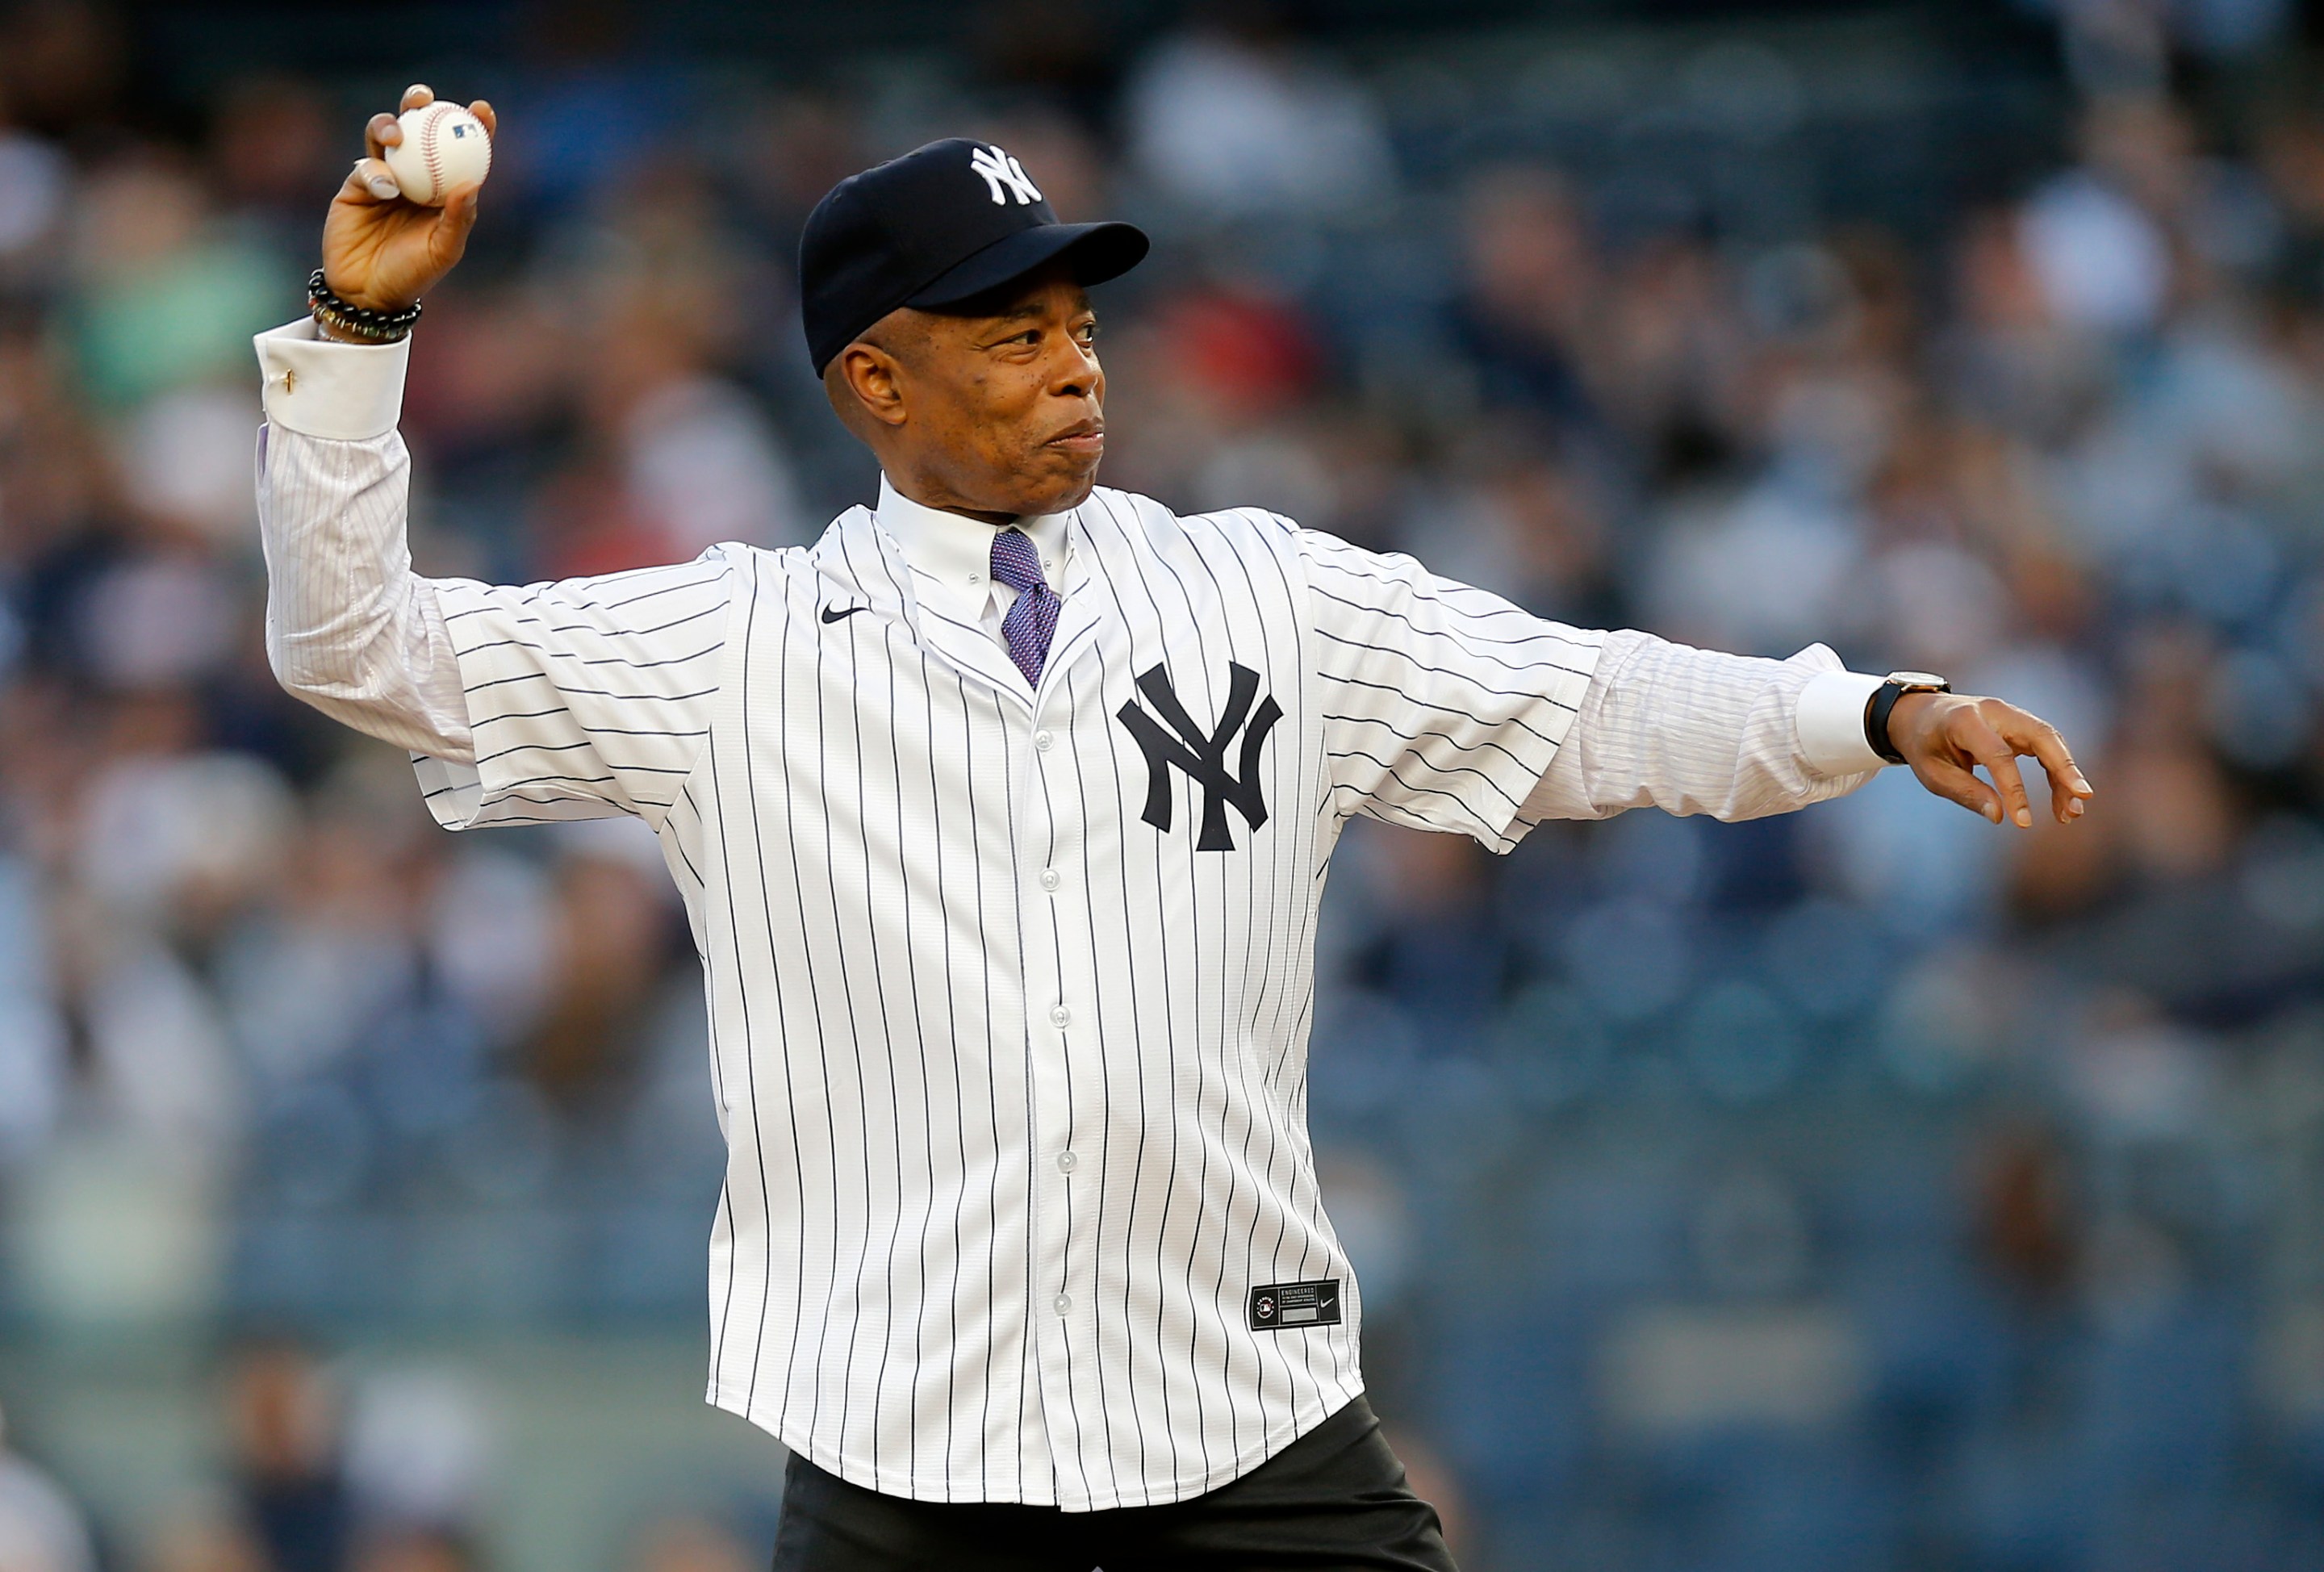 New York Mayor Eric Adams throws out the first pitch at Yankee Stadium in May of 2022.